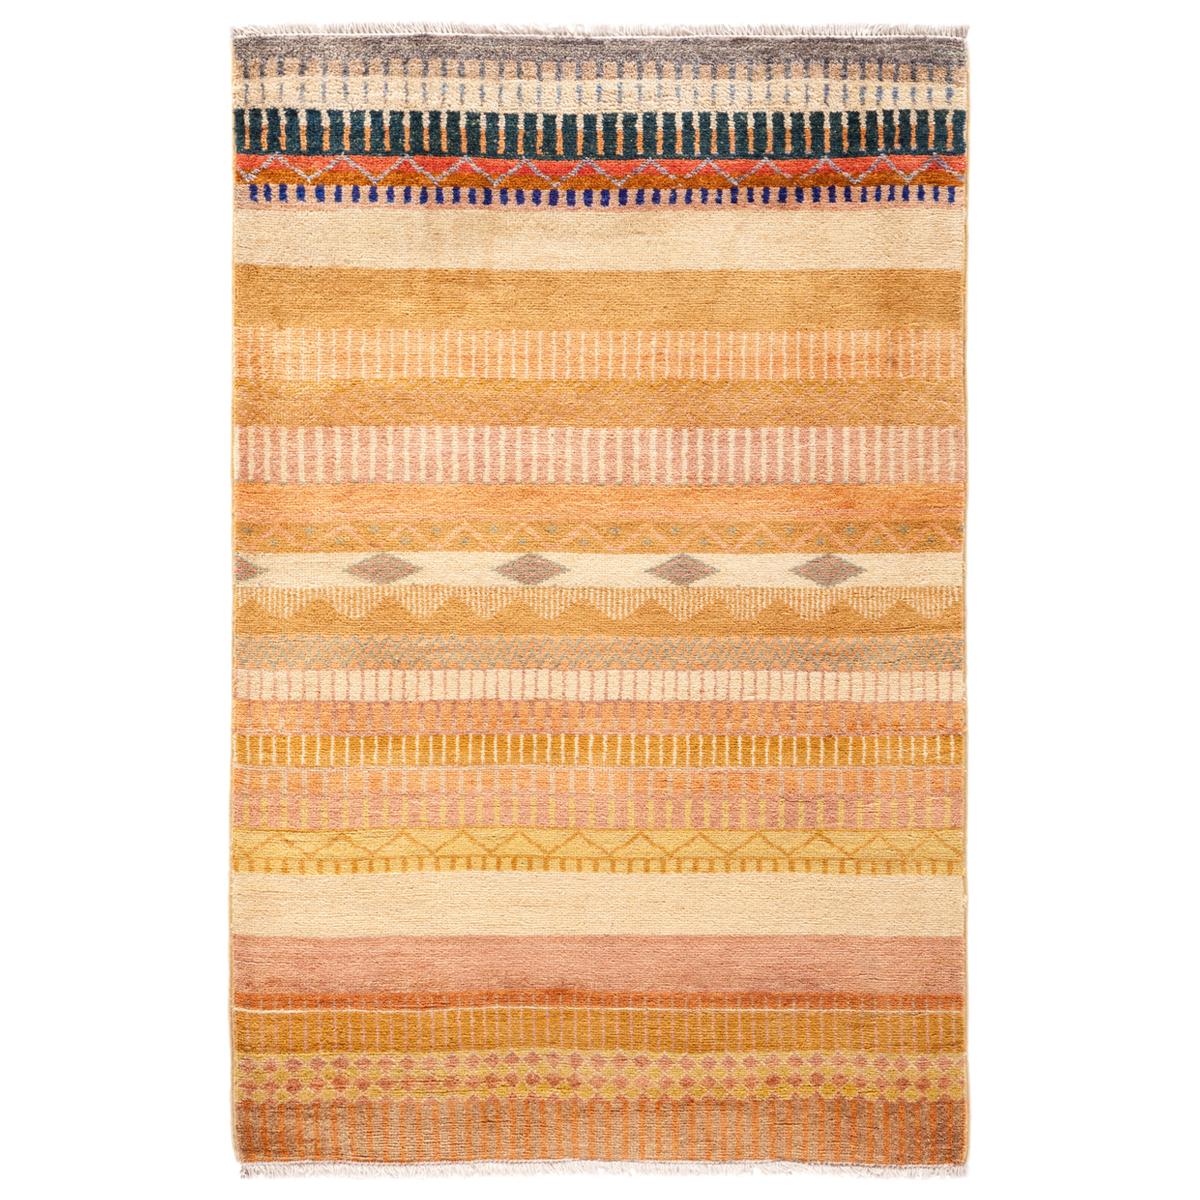 One of a Kind Tribal Wool Hand Knotted Area Rug, Caramel